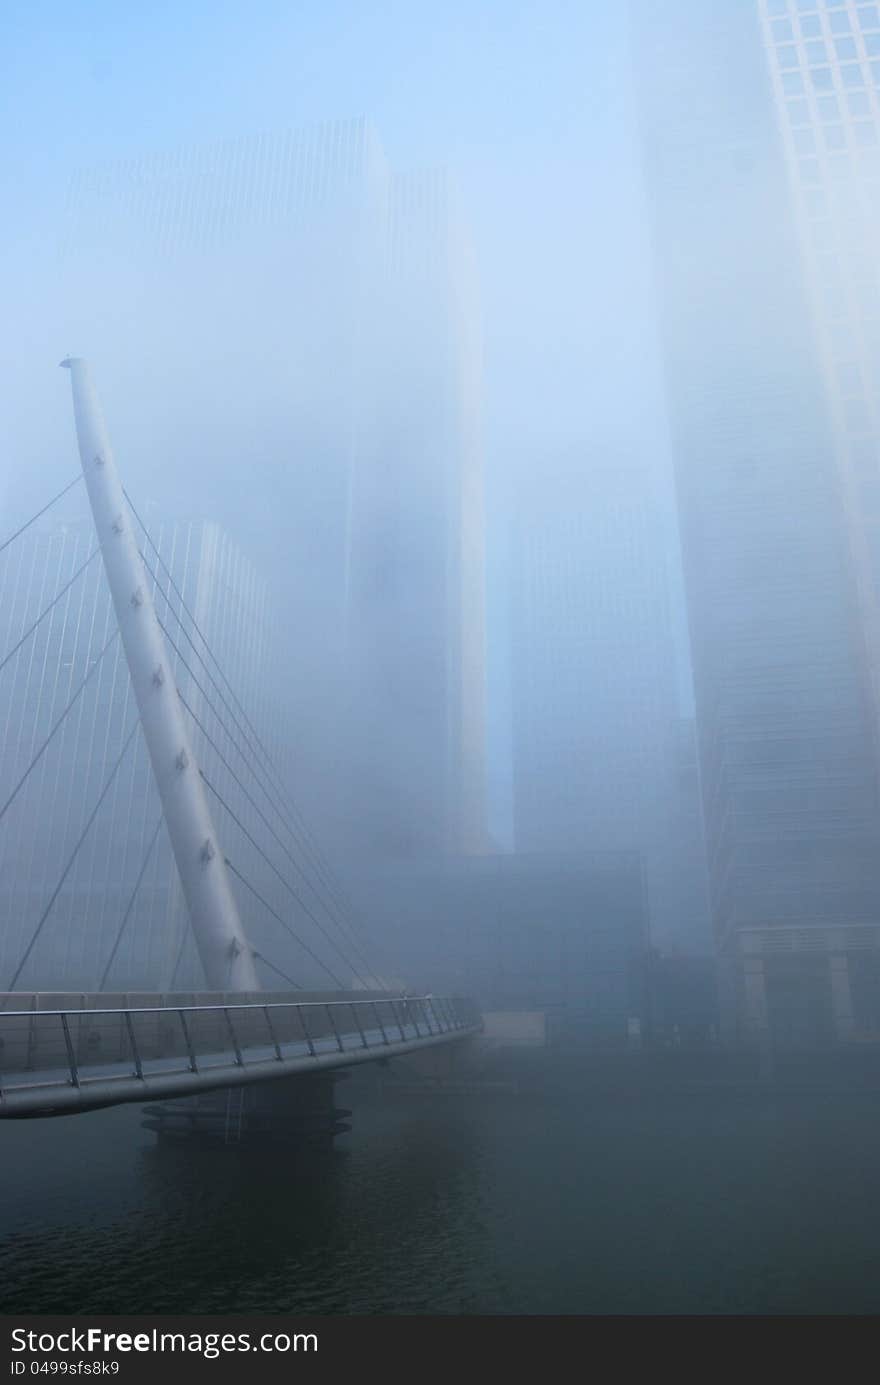 Thick fog obscures the view towards a bright and sunny Canary Wharf, seen from West India Dock, beside the South Quay Footbridge, London Docklands. Modern suspension bridge and modern skyscraper towers emerge from the sun and the mist. . Thick fog obscures the view towards a bright and sunny Canary Wharf, seen from West India Dock, beside the South Quay Footbridge, London Docklands. Modern suspension bridge and modern skyscraper towers emerge from the sun and the mist.